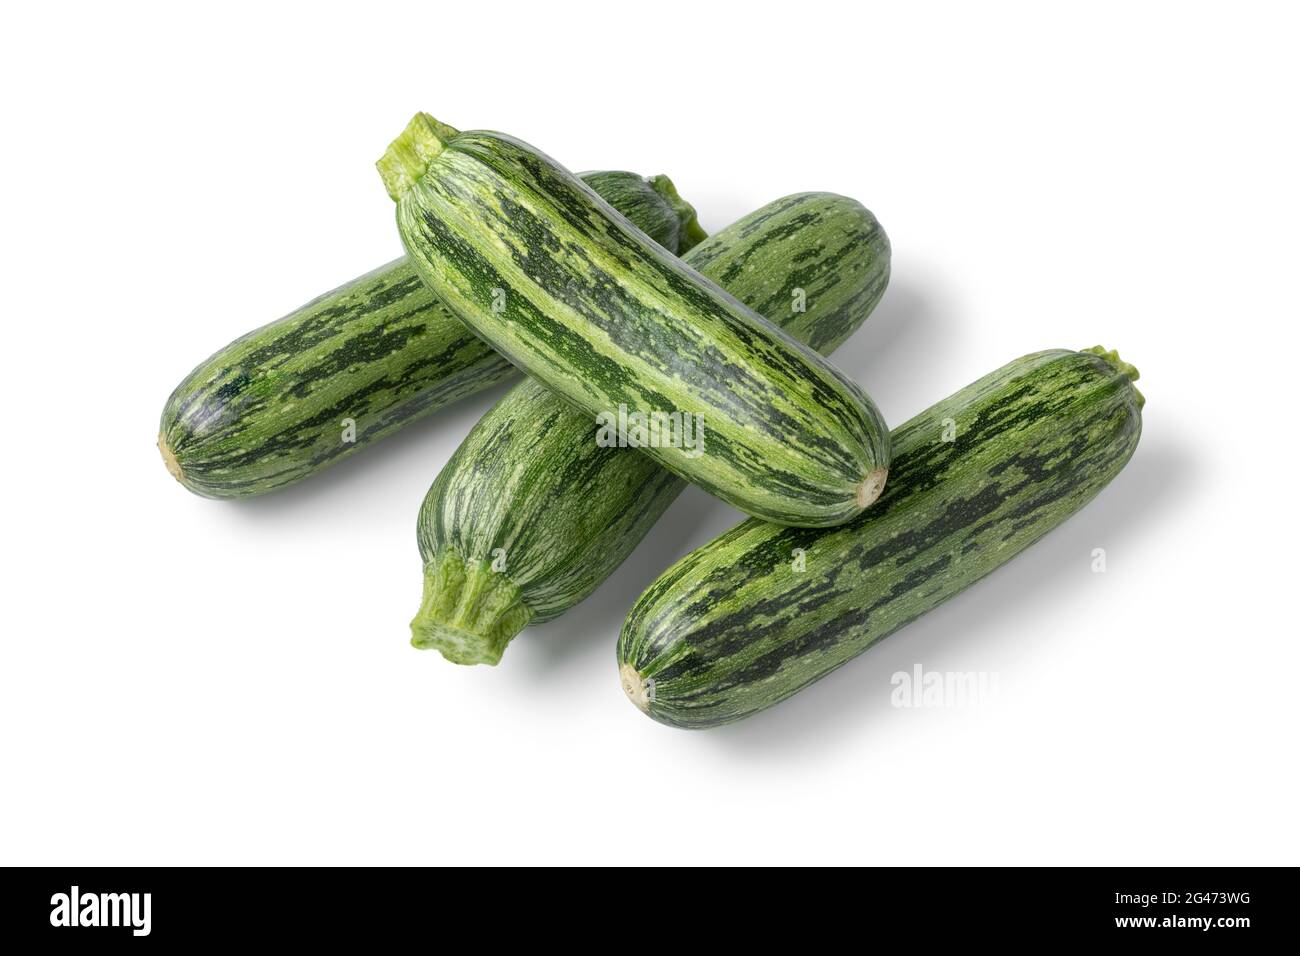 Heap of fresh raw green spotted courgette close up isolated on white background Stock Photo